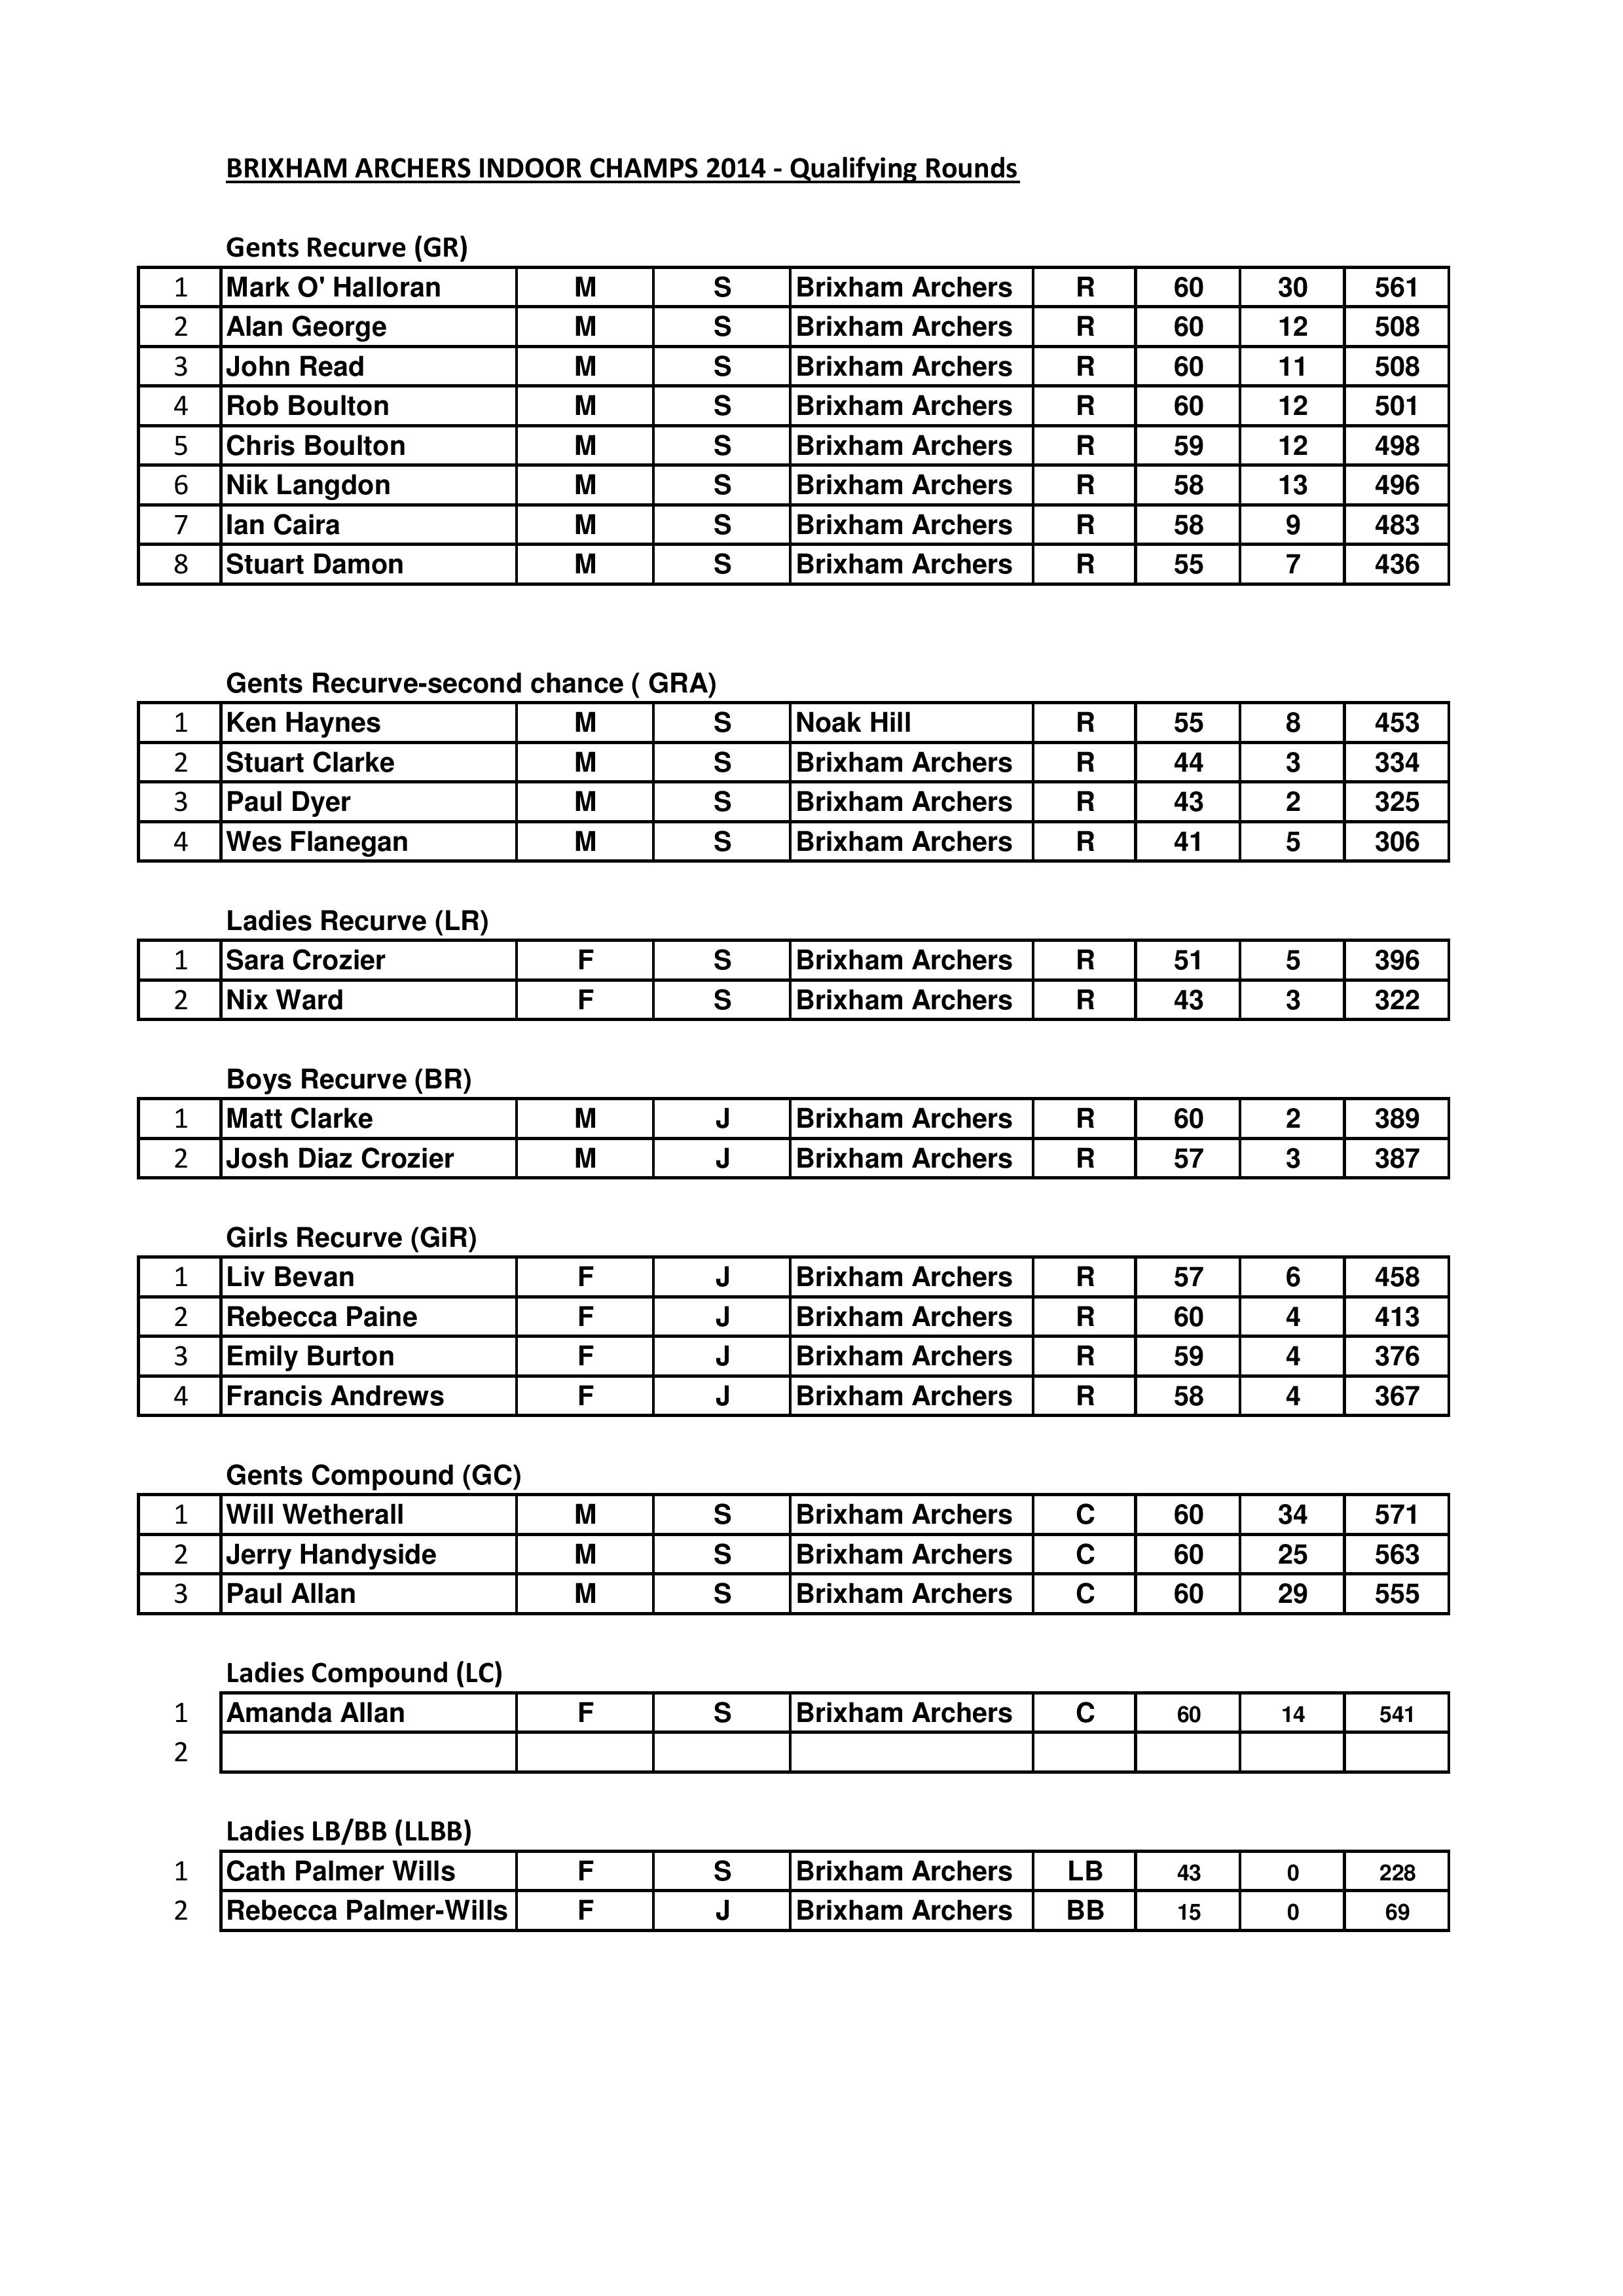 BA Indoor Champs Qualifying Rounds 2014-page-001 (1)